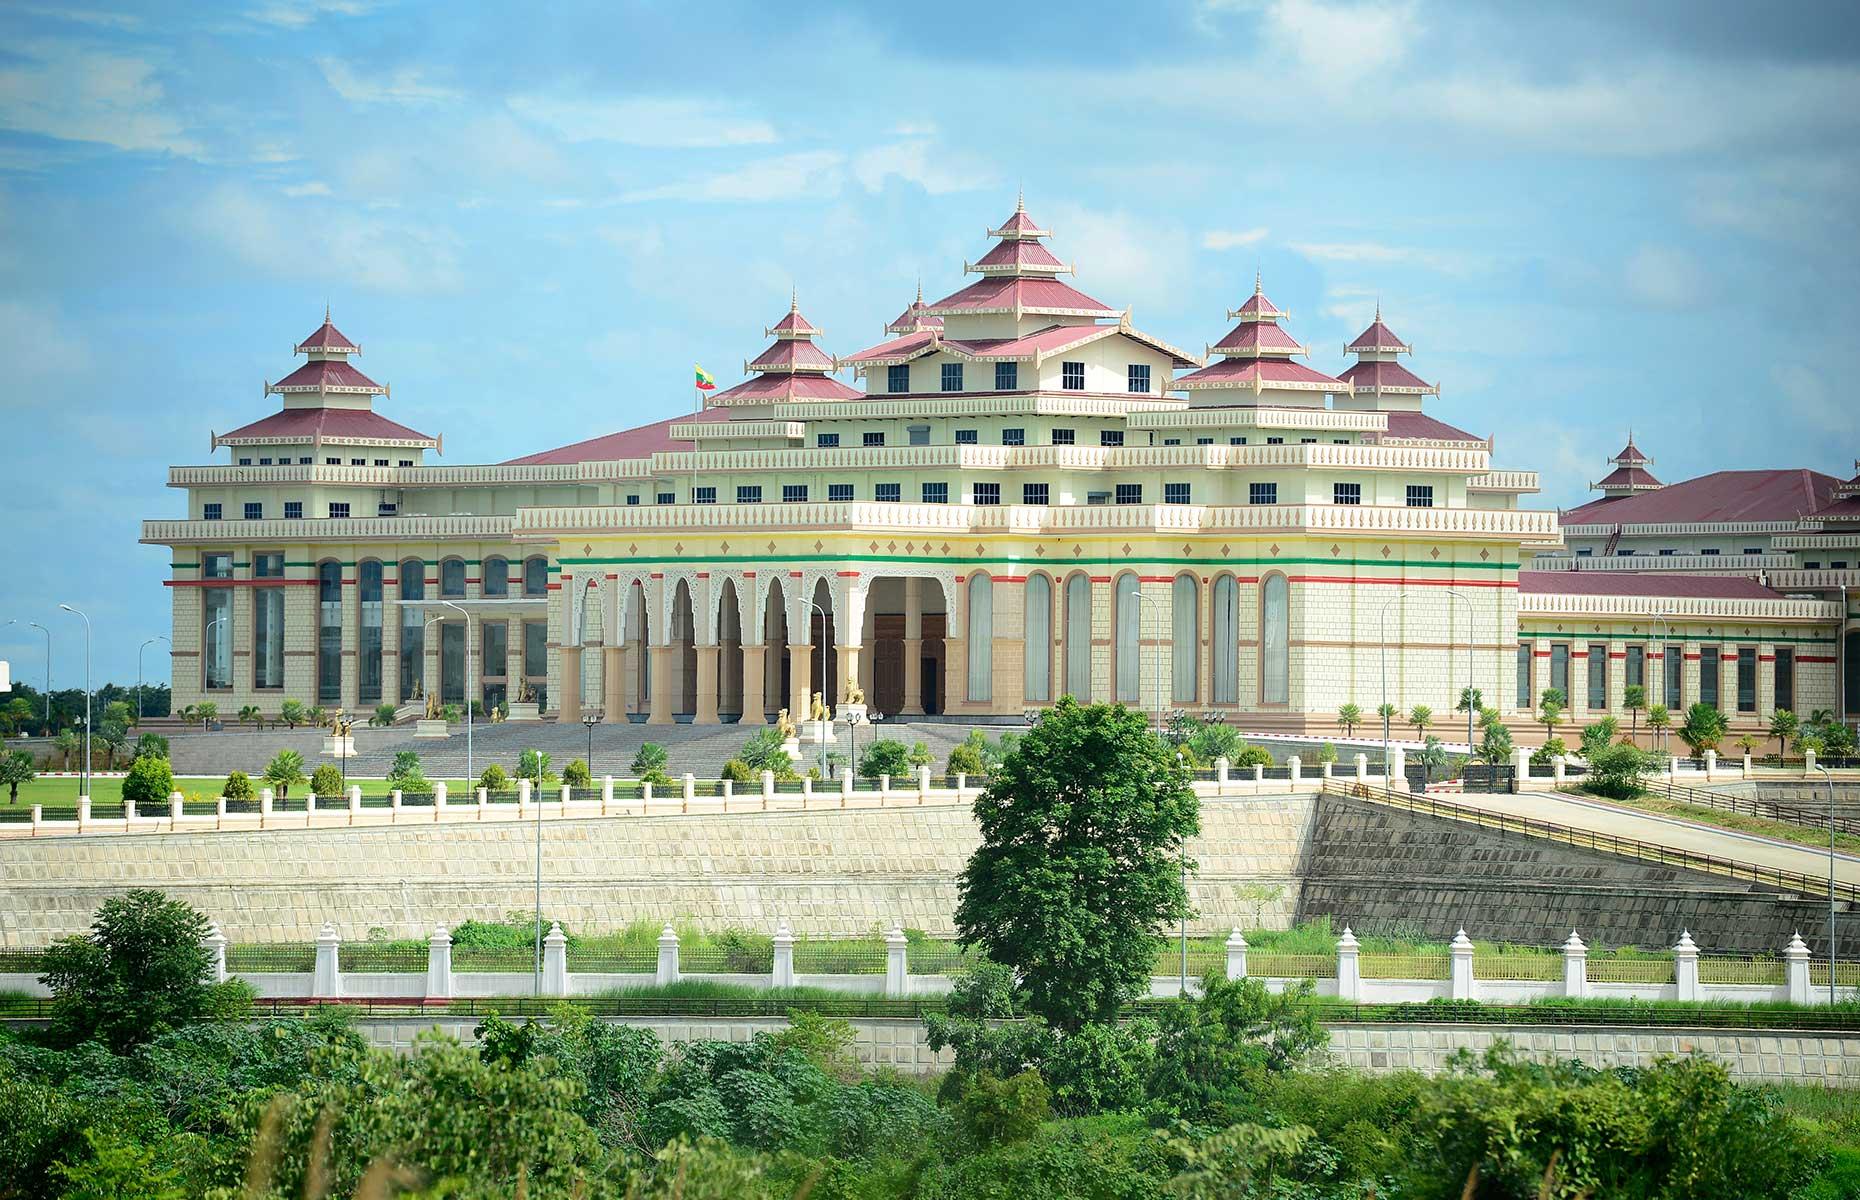 <p>Myanmar's parliament complex (pictured) requires tourists to submit an application three days ahead of their planned visit, and there are plenty of other strict rules in place in the country's capital. One French tourist was unaware of their Aircraft Act, which forbids flying drones over or near government buildings, and <a href="https://www.rfi.fr/en/asia-pacific/20190306-french-tourist-released-jail-myanmar-after-flying-drone-near-parliament">unwittingly violated an import-export law without a license</a>. After serving a month-long prison sentence he paid two fines before walking free.</p>